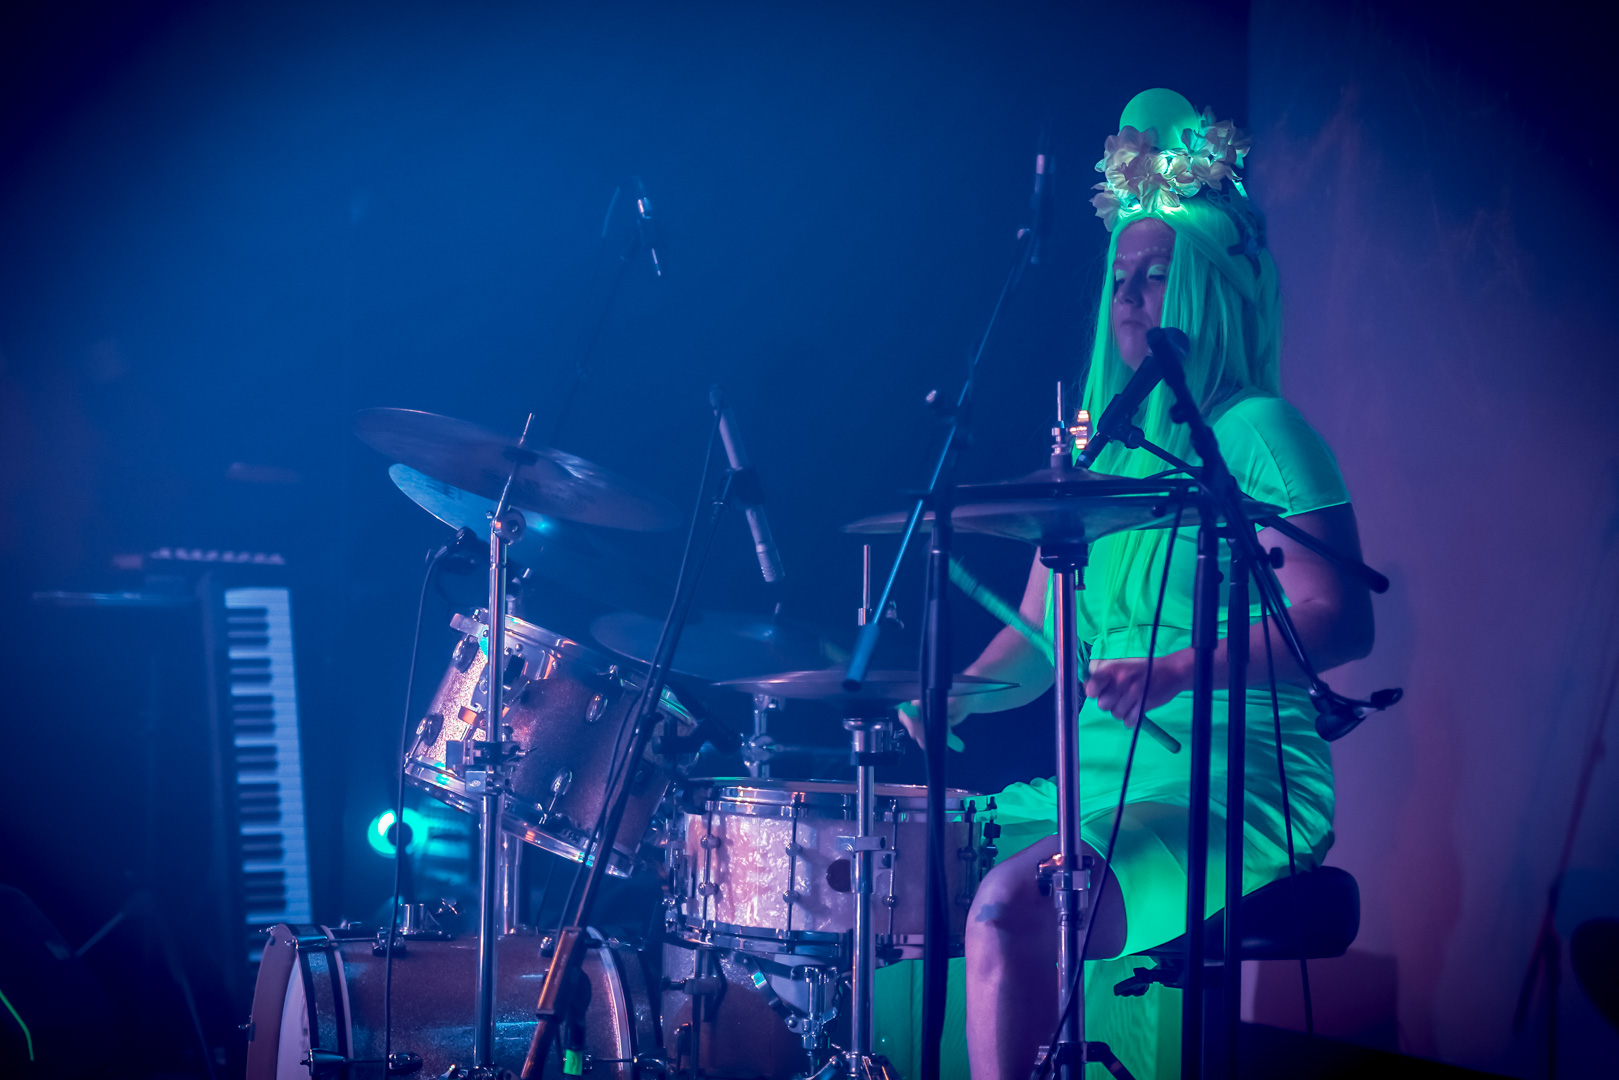 A drummer in neon green outfit on stage